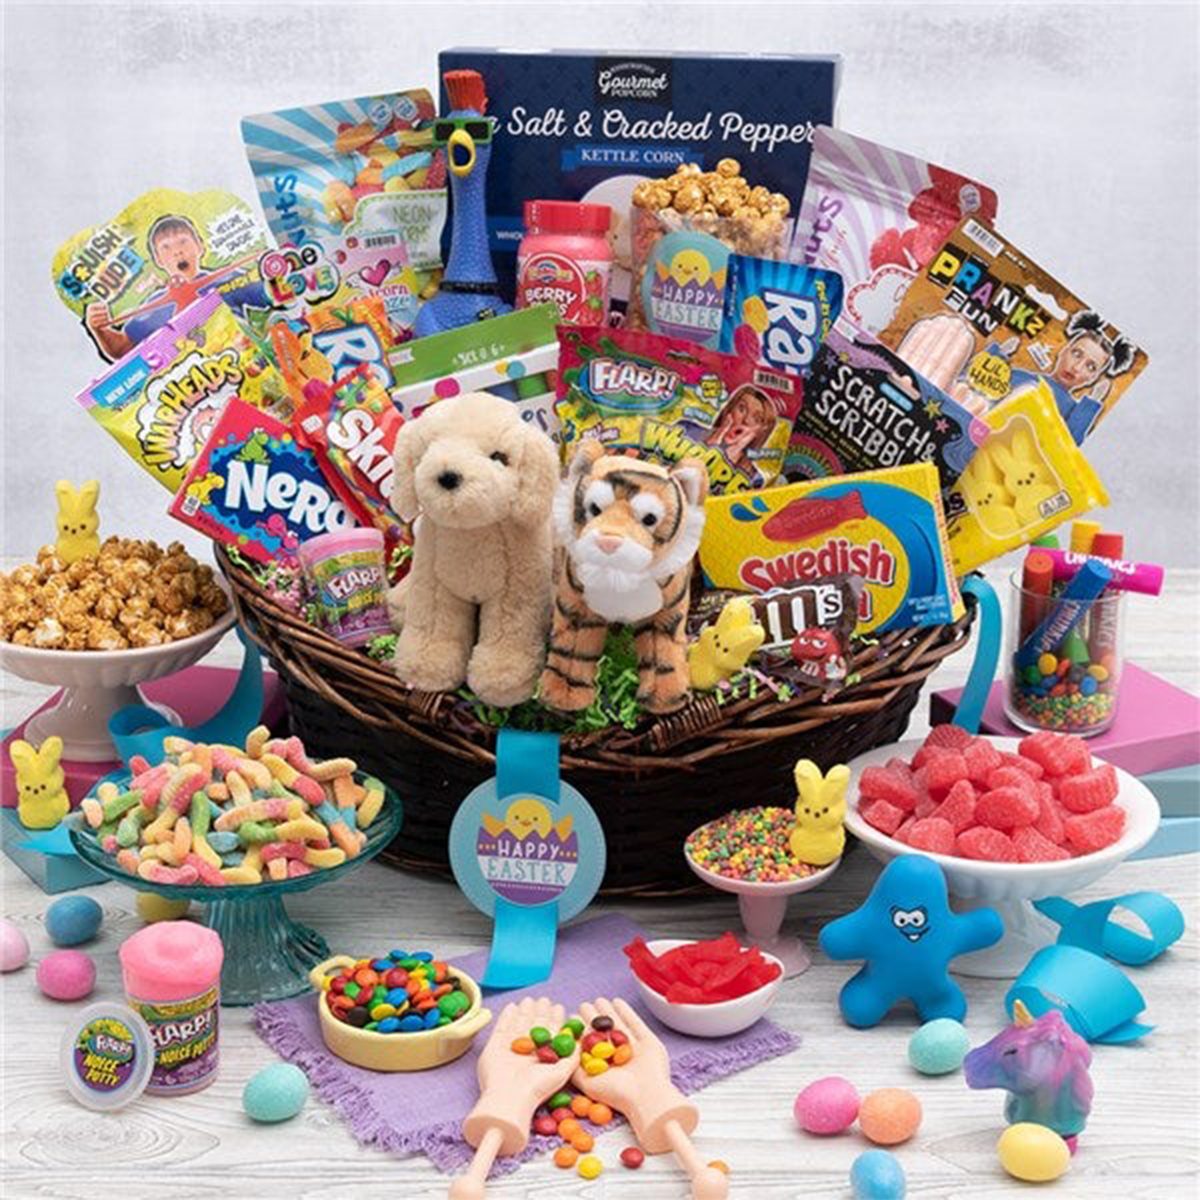 Best For The Whole Family Gourmet Gift Baskets Look What The Easter Bunny Brought Me